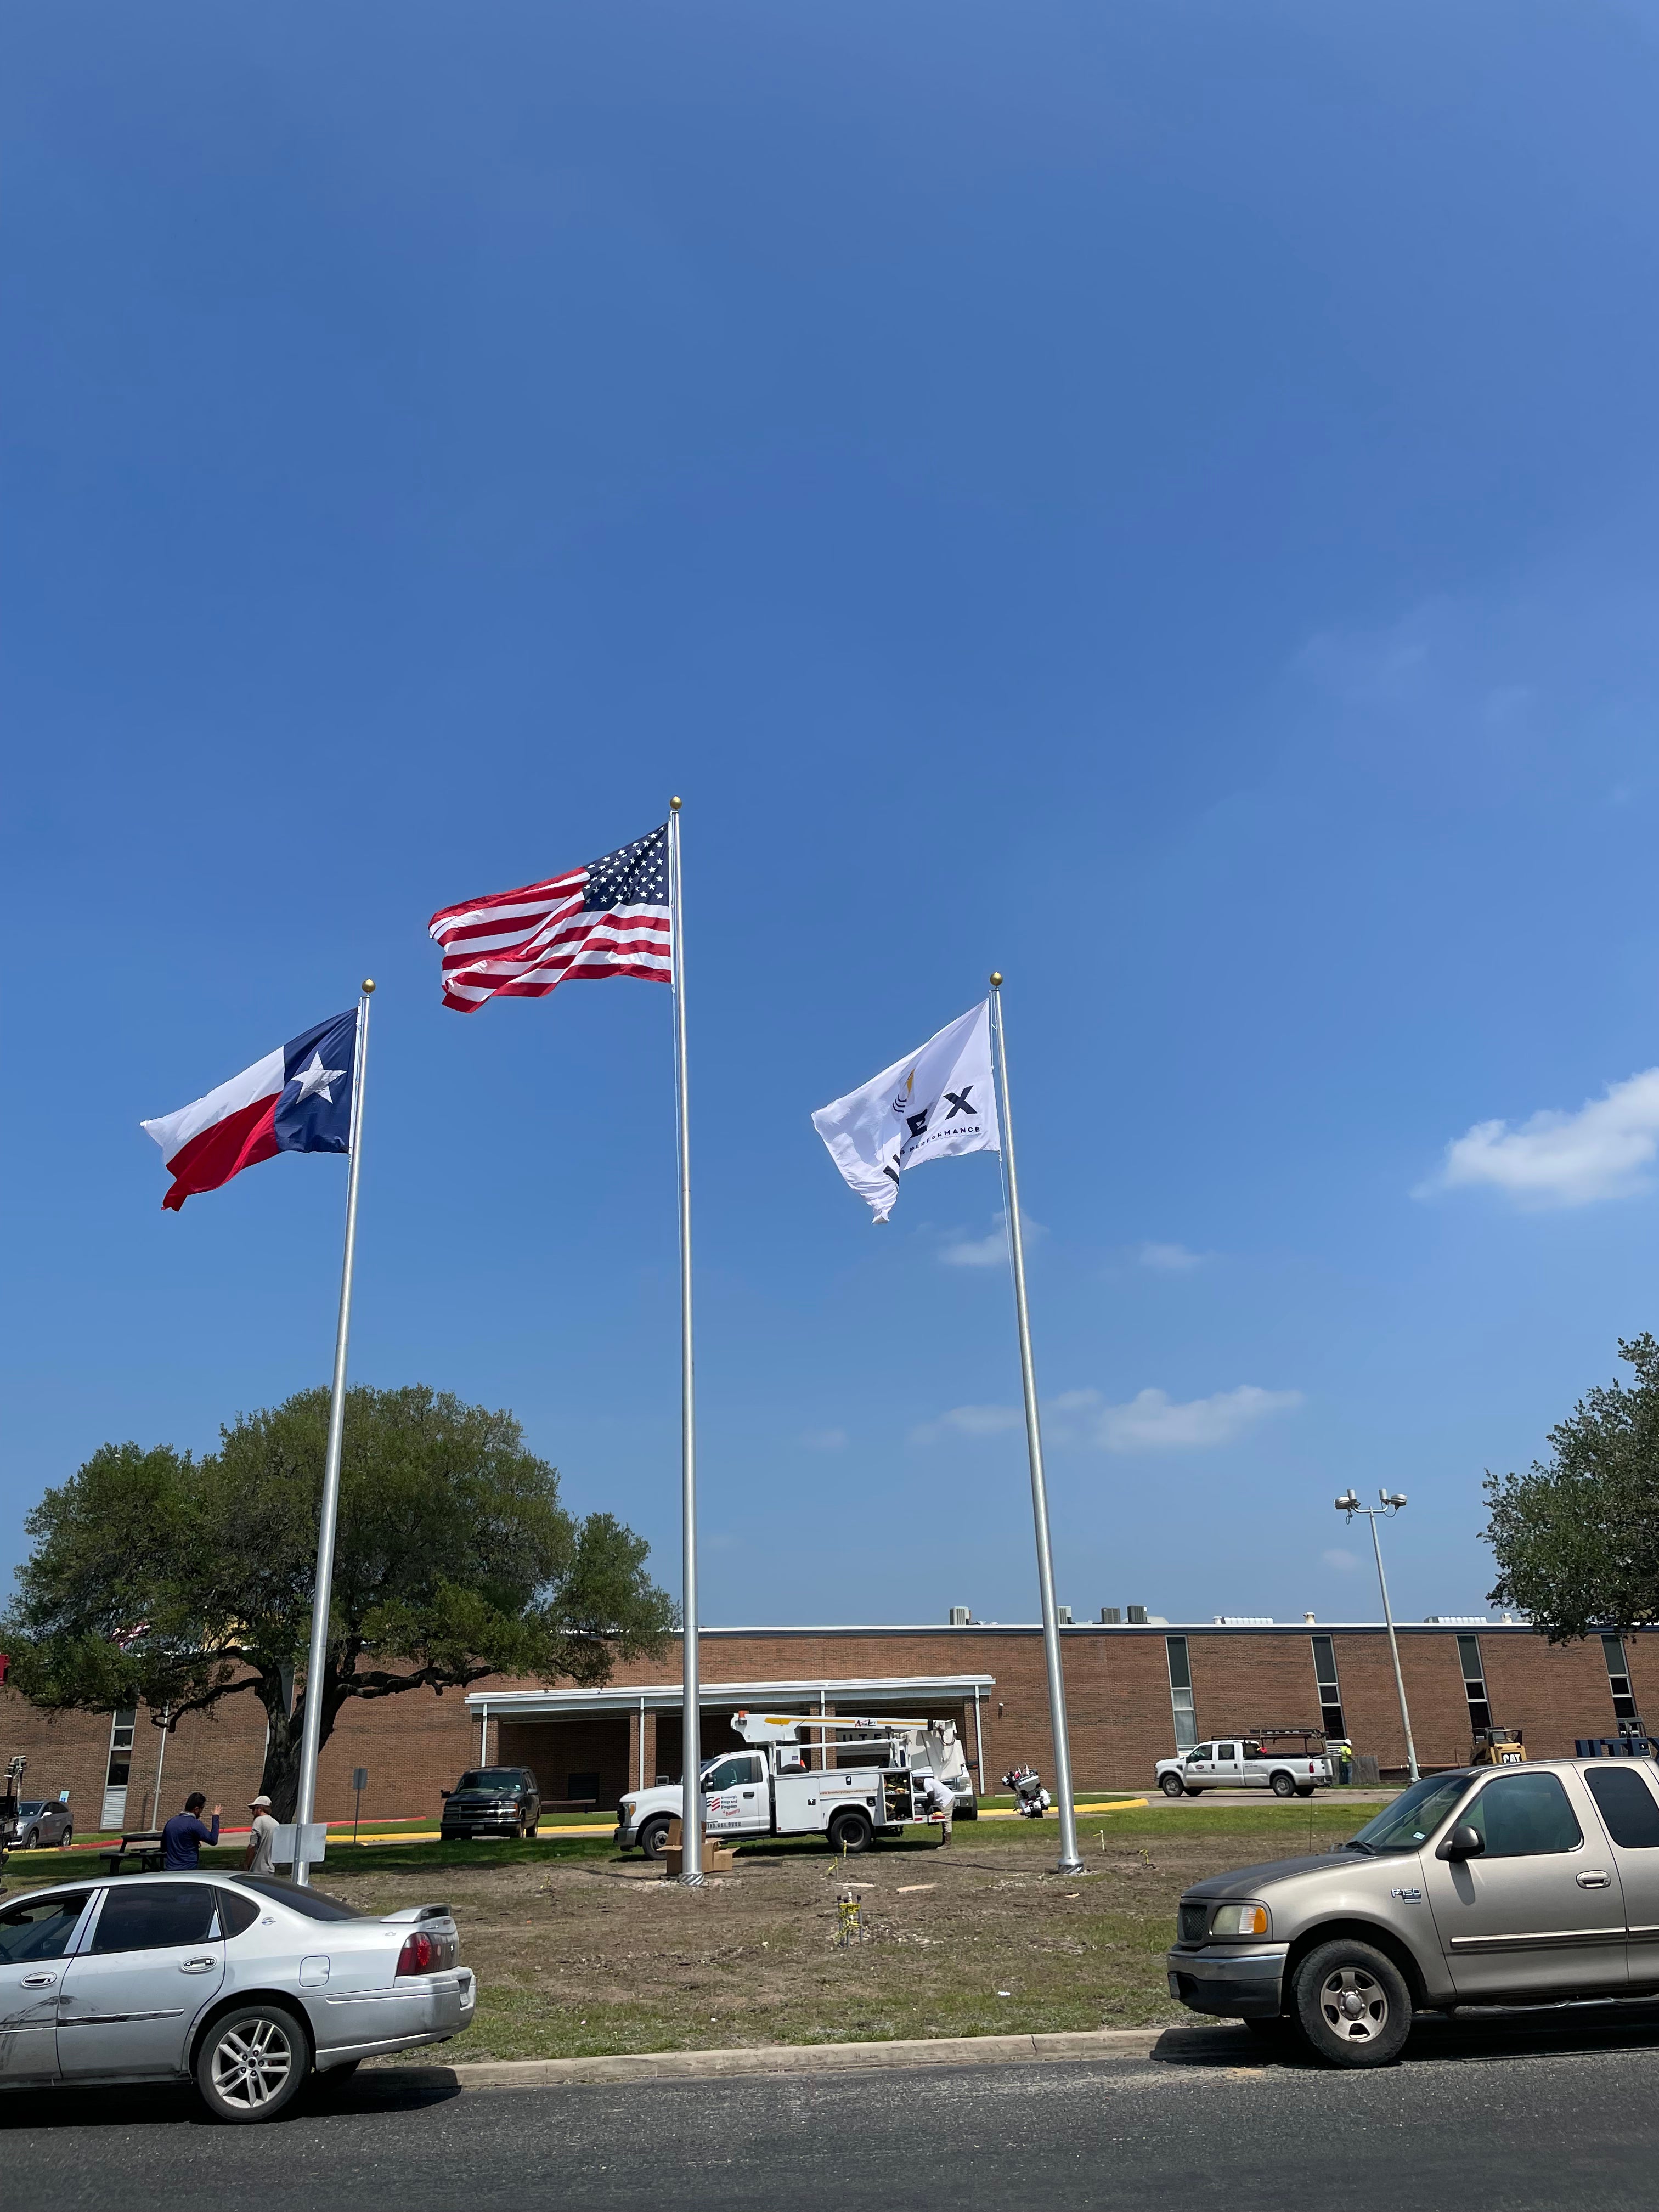 1-60'/2-50' Satin finish. Flying 12'x18' U.S., 10'x15' Texas and Corporate flags.